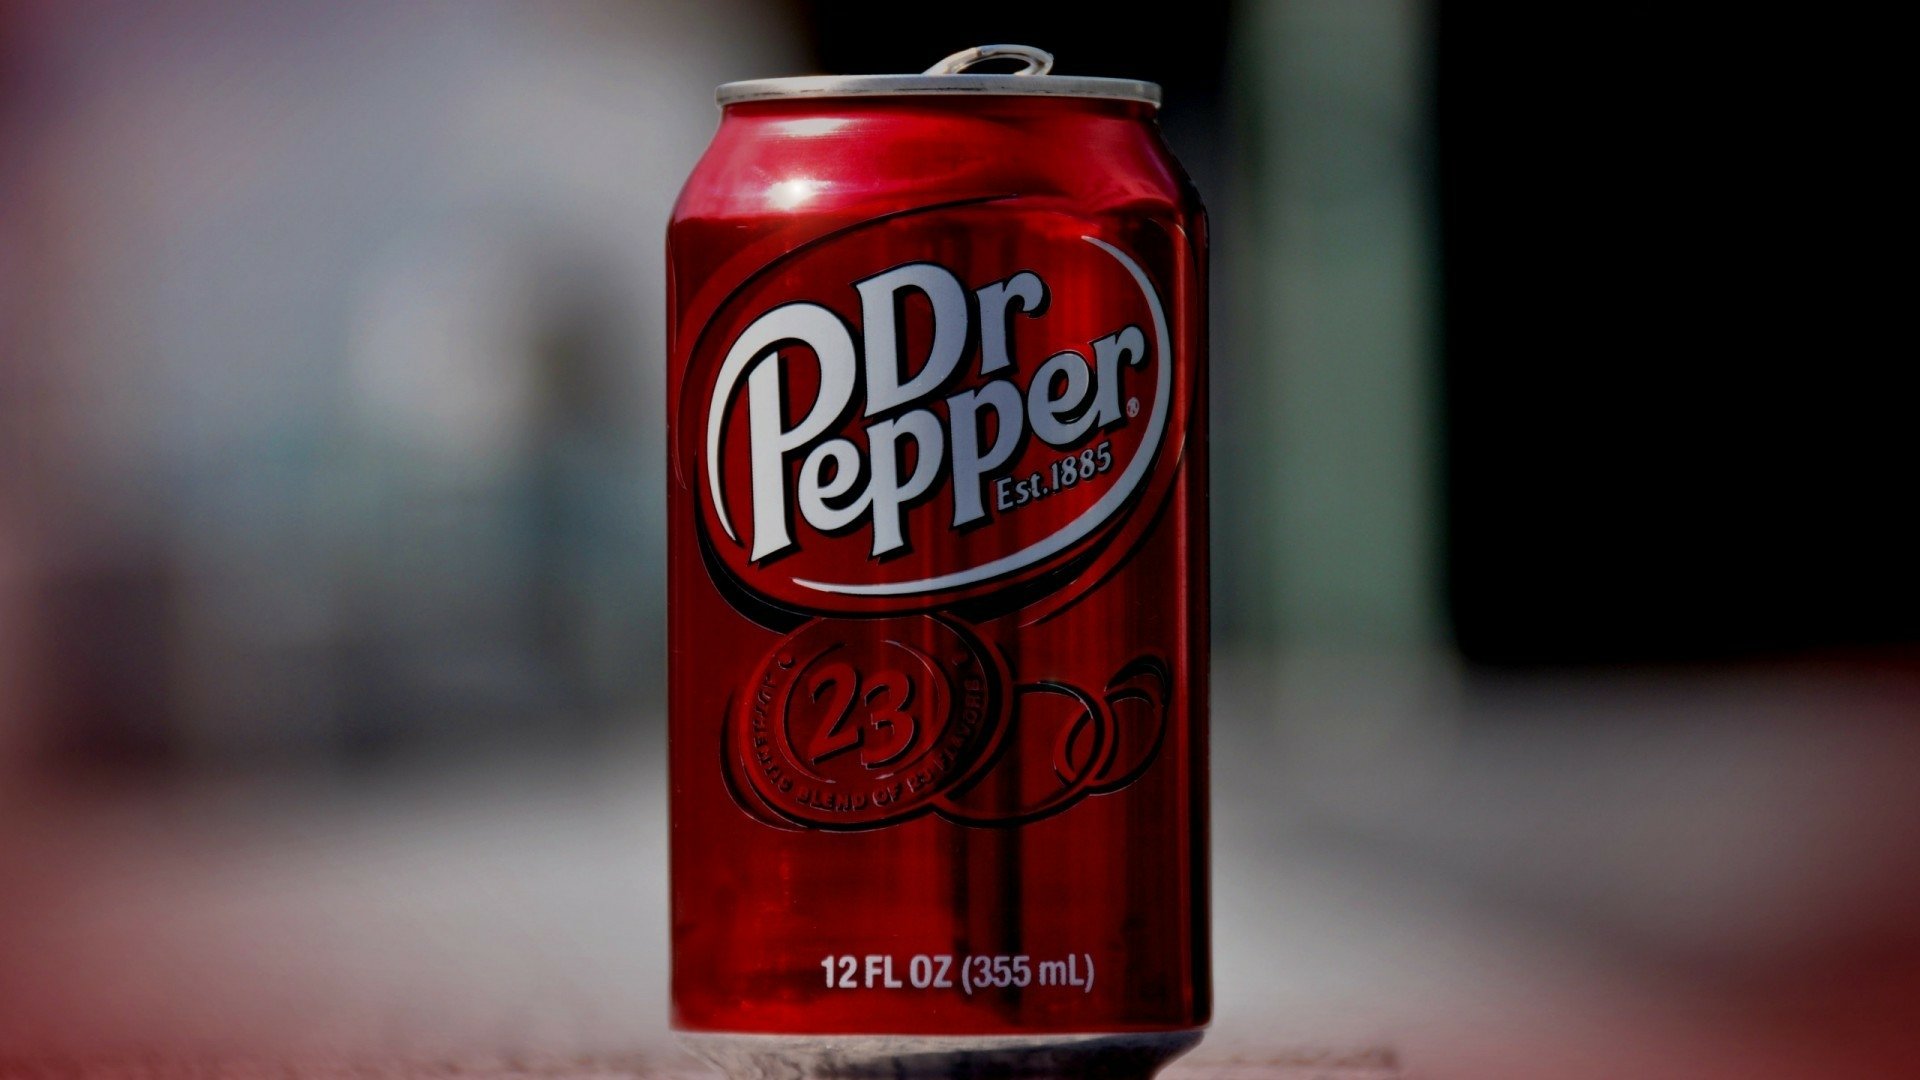 Dr Pepper Hd Wallpaper Background Image 1920x1080 Id